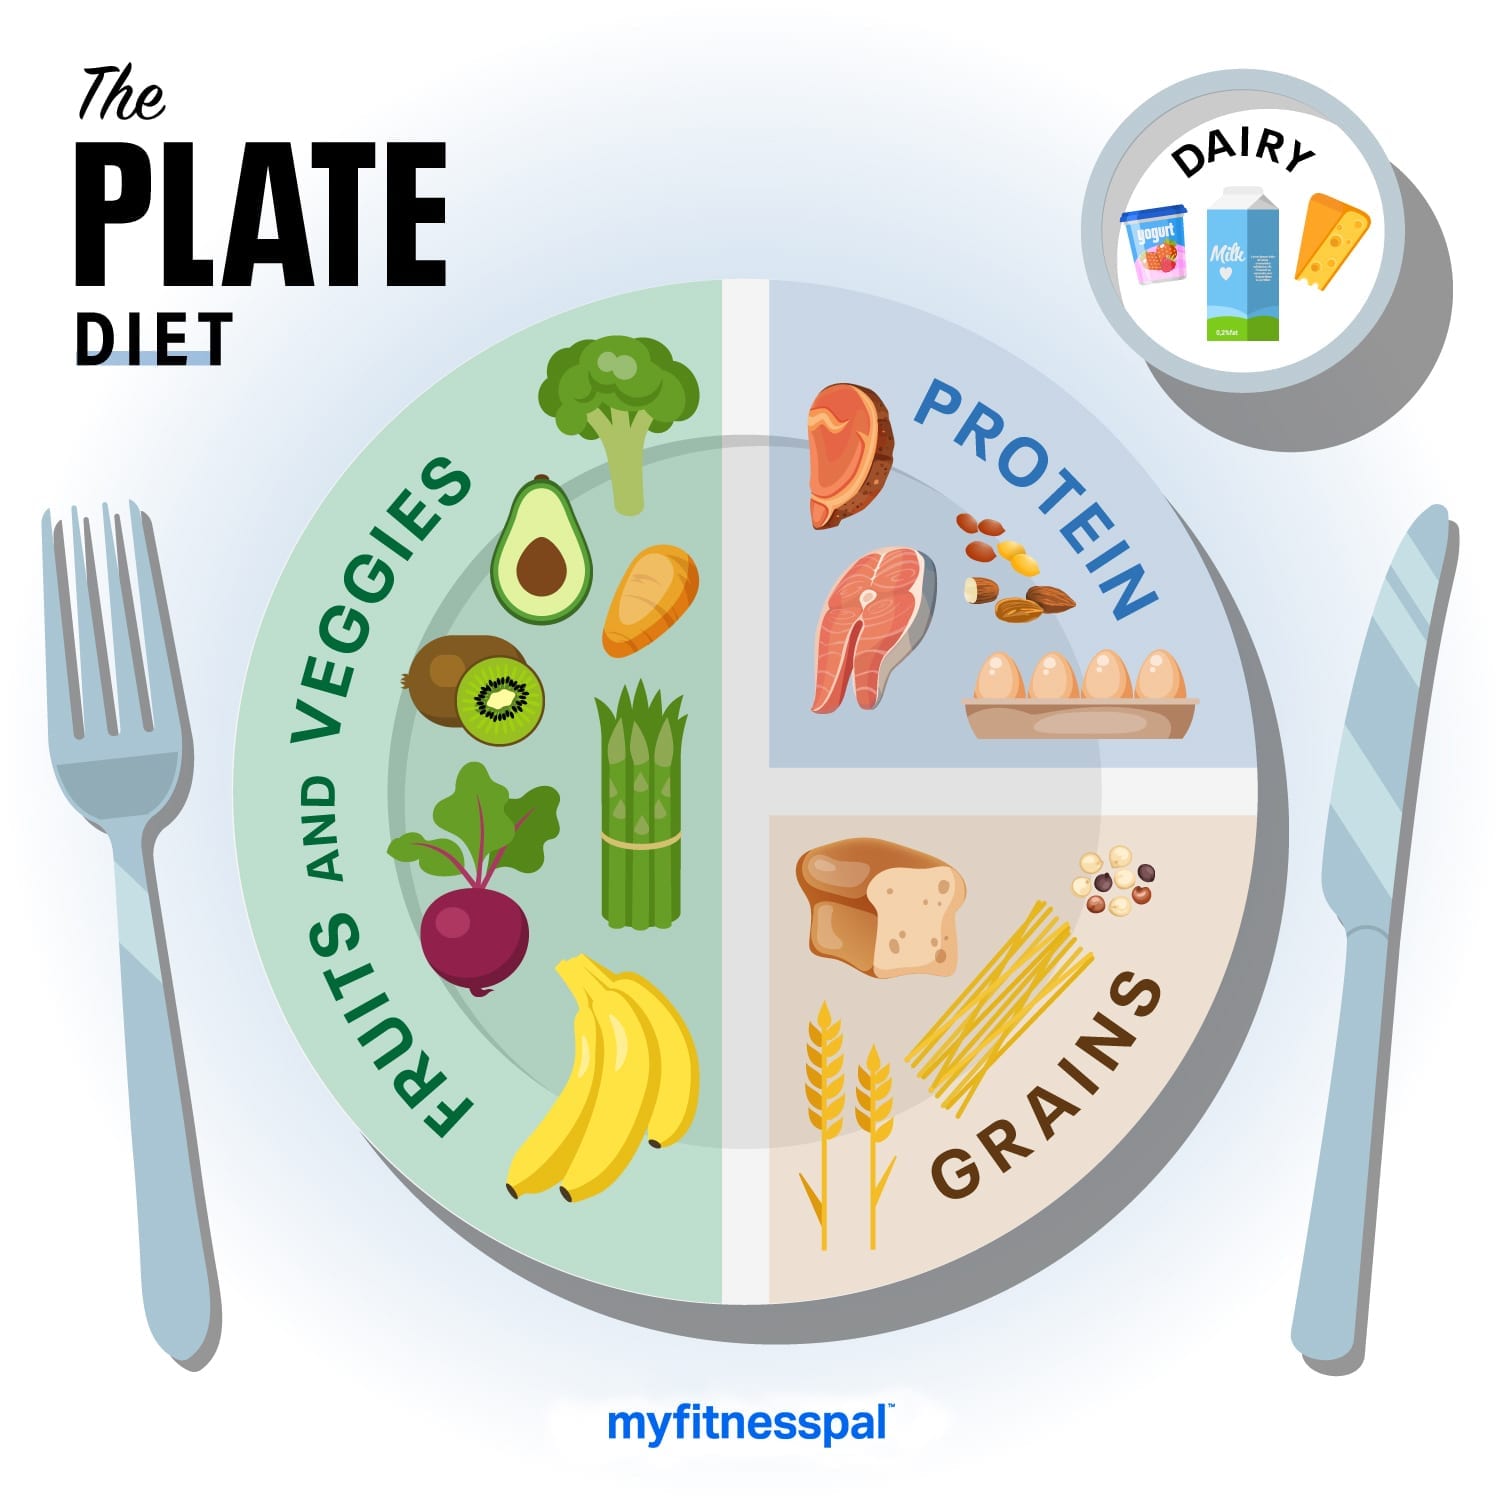 A colorful image of a plate filled with a nutritious and delicious meal, showcasing a variety of vegetables, lean protein, and whole grains.